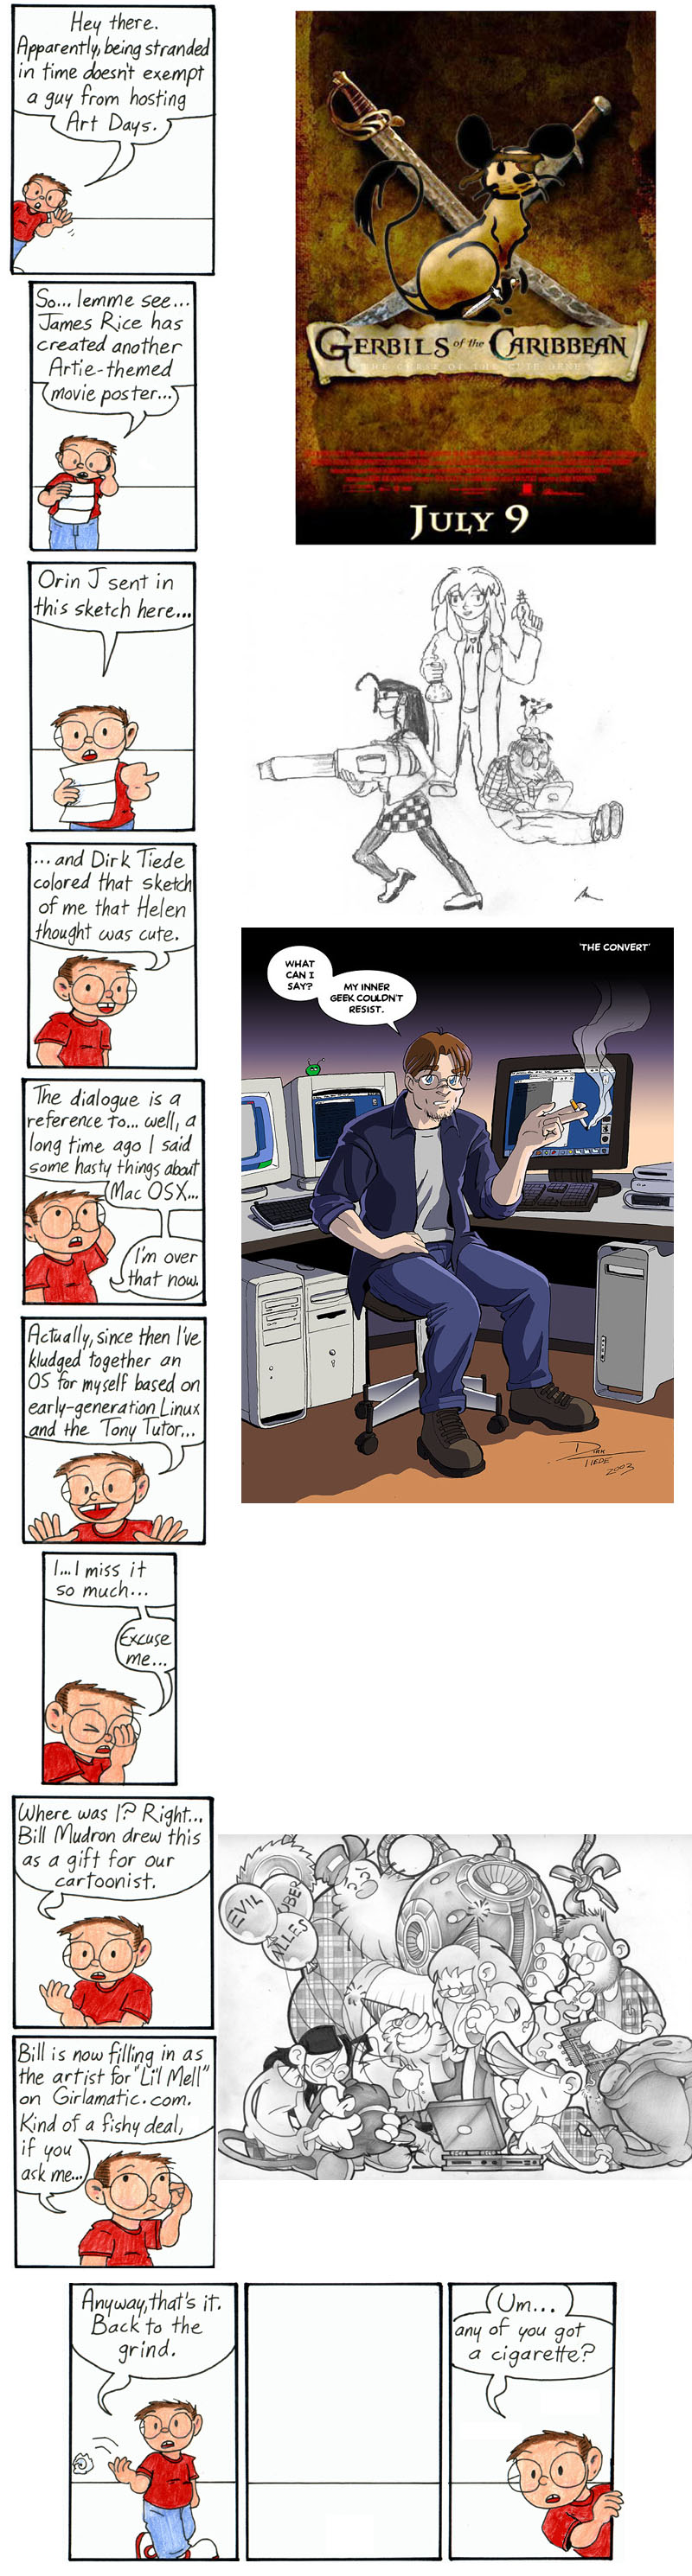 This strip is dedicated to James Rice, Orin J, Dirk Tiede, and Bill Mudron.